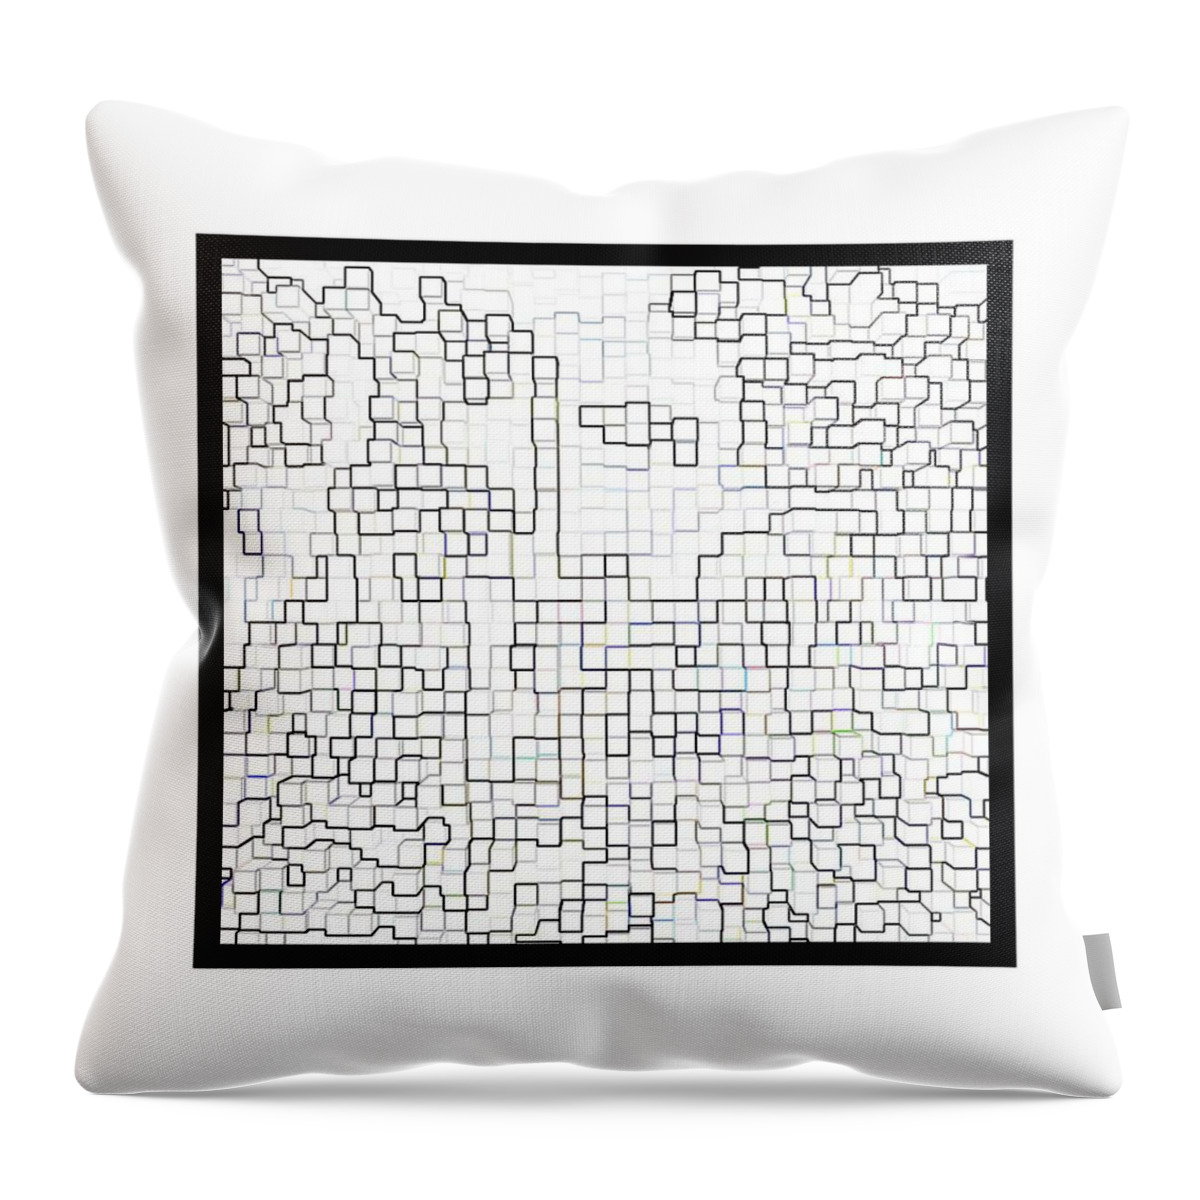 Abstracts Throw Pillow featuring the photograph Osmosis by Bruce IORIO